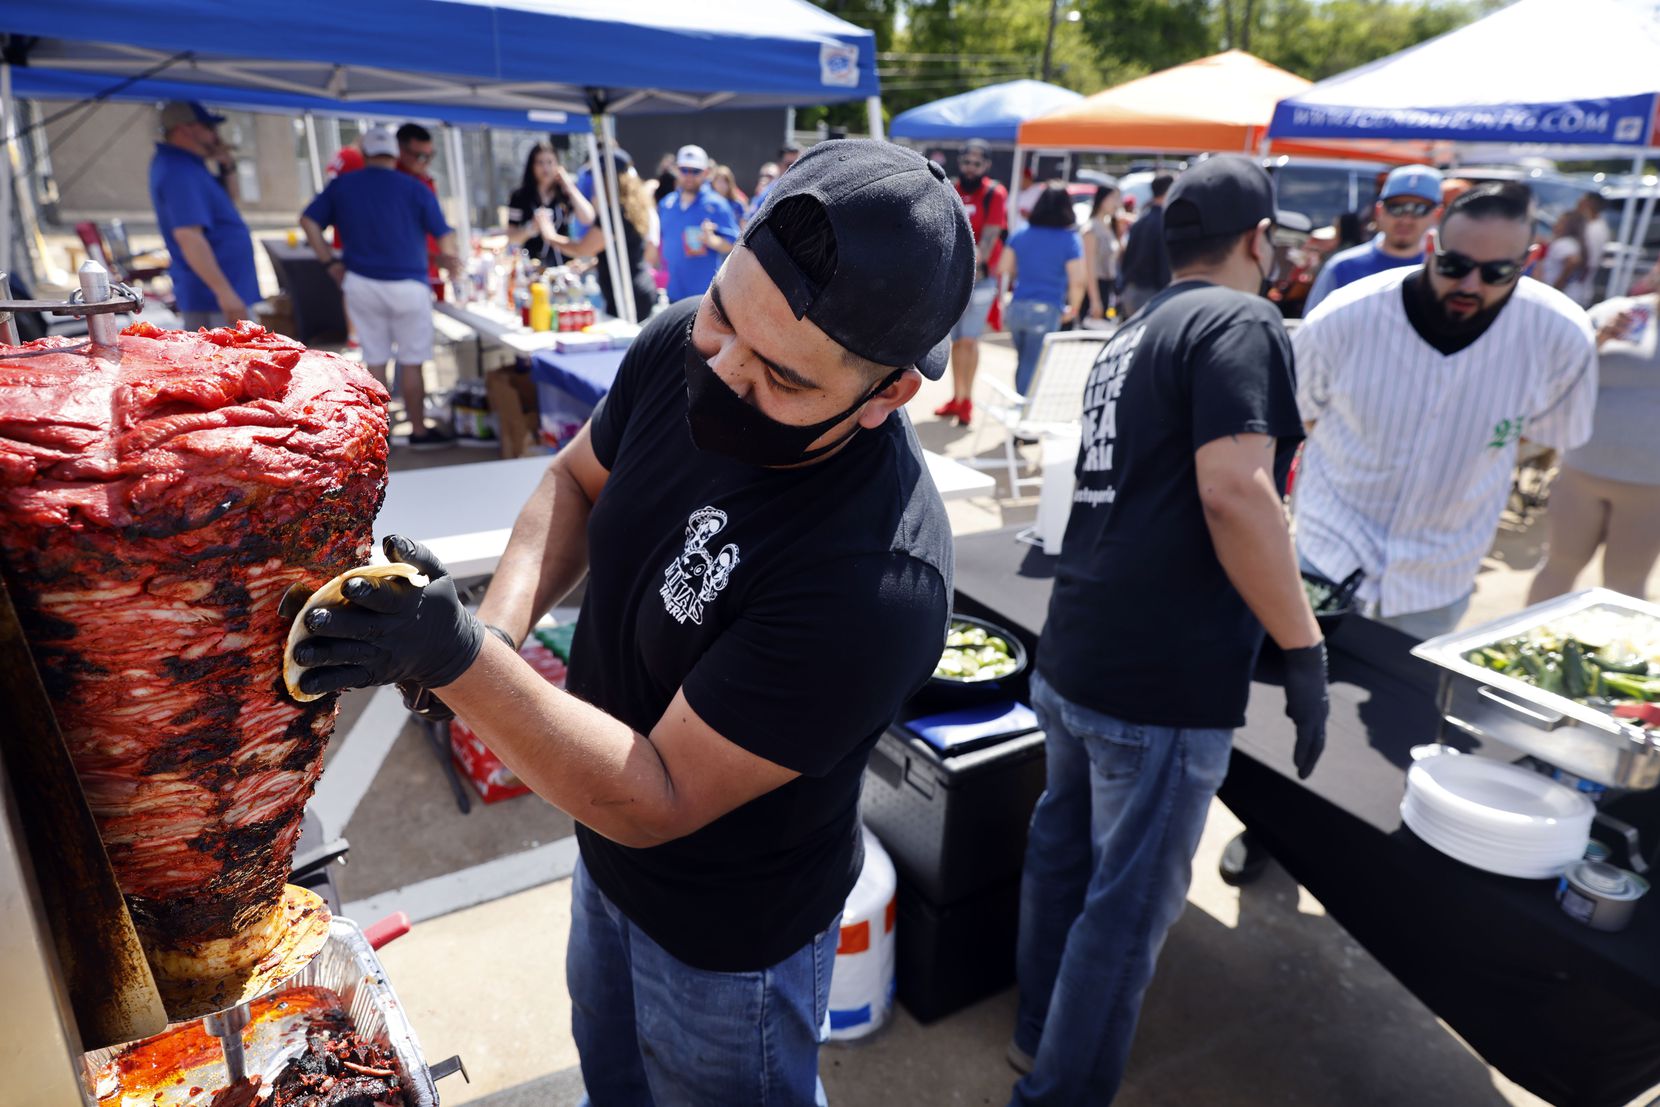 Saul Hernandez trims pork shoulder for Trumpo during an Opening Day tailgate party on private property outside of Globe Life Field in Arlington, Monday, April 5, 2021. The Rangers are facing the Toronto Blue Jays in the home opener. (Tom Fox/The Dallas Morning News)